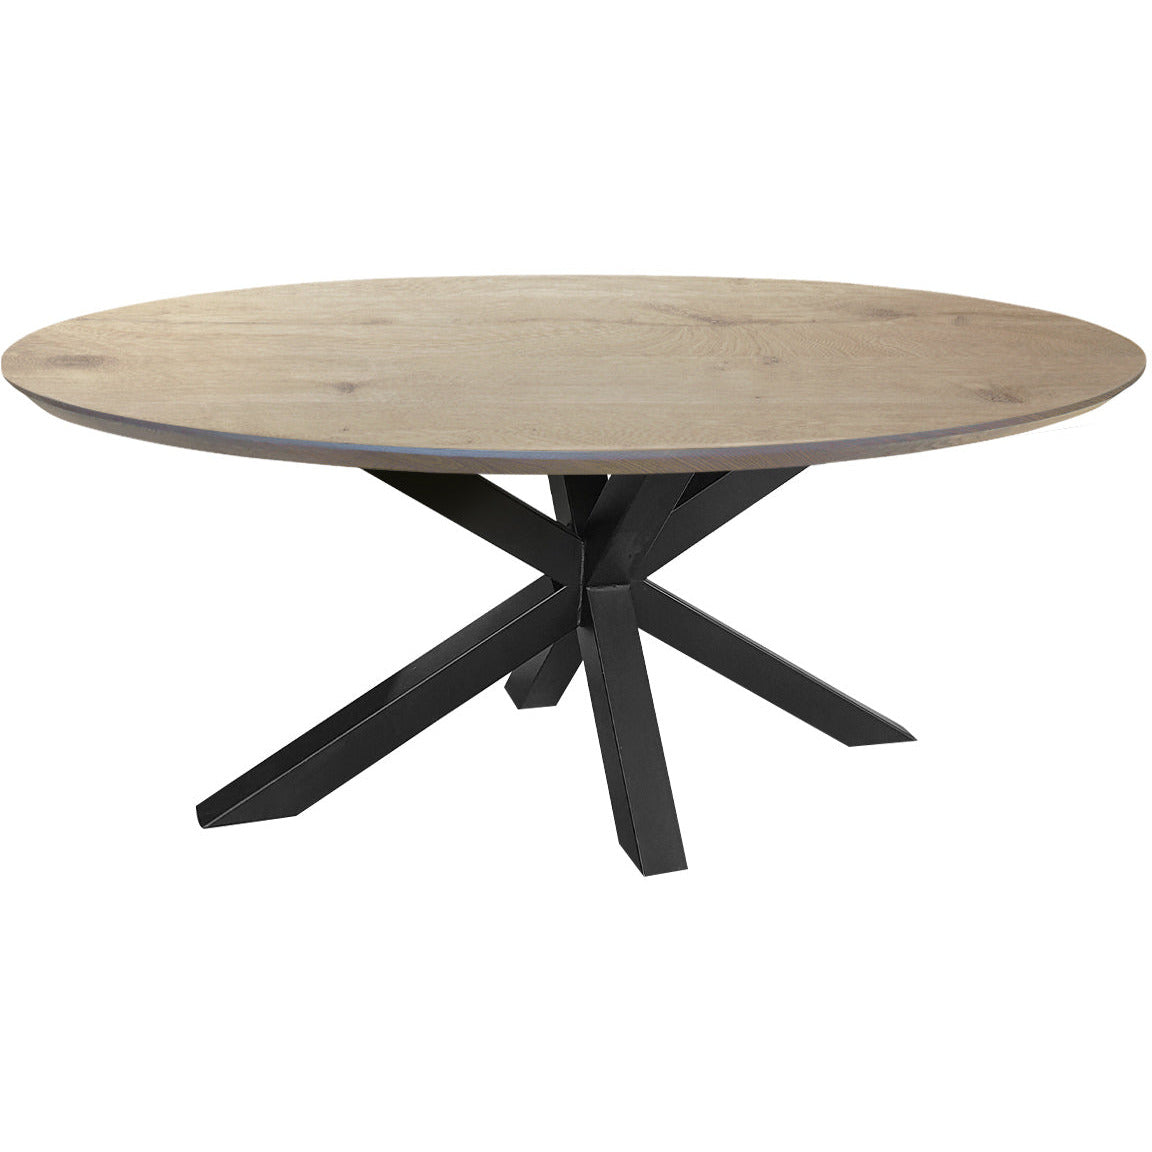 Dining table | Oval | Whitewash | Oak wood | Lacquered | Spiderpaw